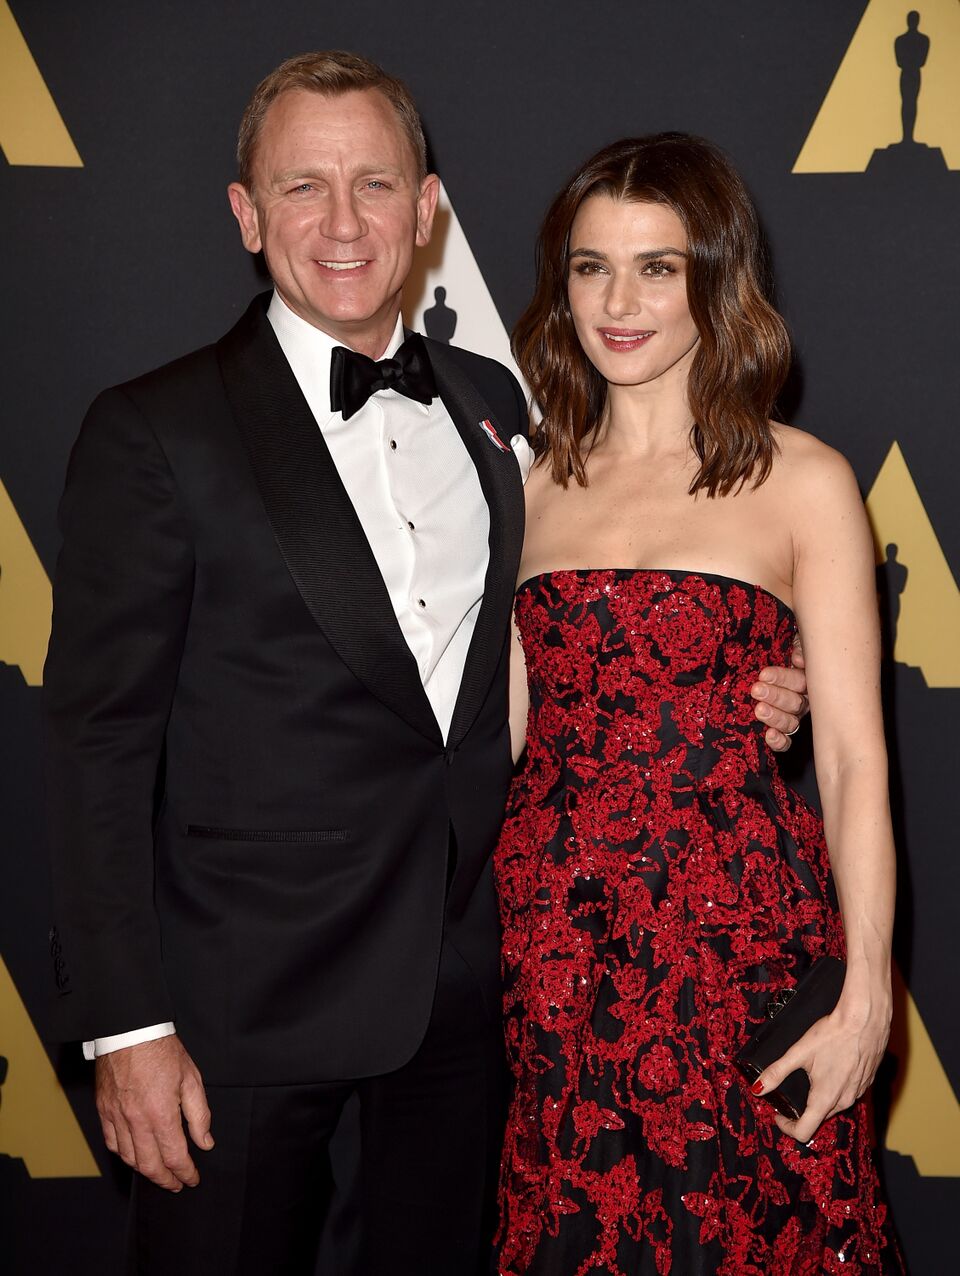 Daniel Craig and Rachel Weisz attend the Academy of Motion Picture Arts and Sciences' 7th annual Governors Awards. | Source: Getty Images